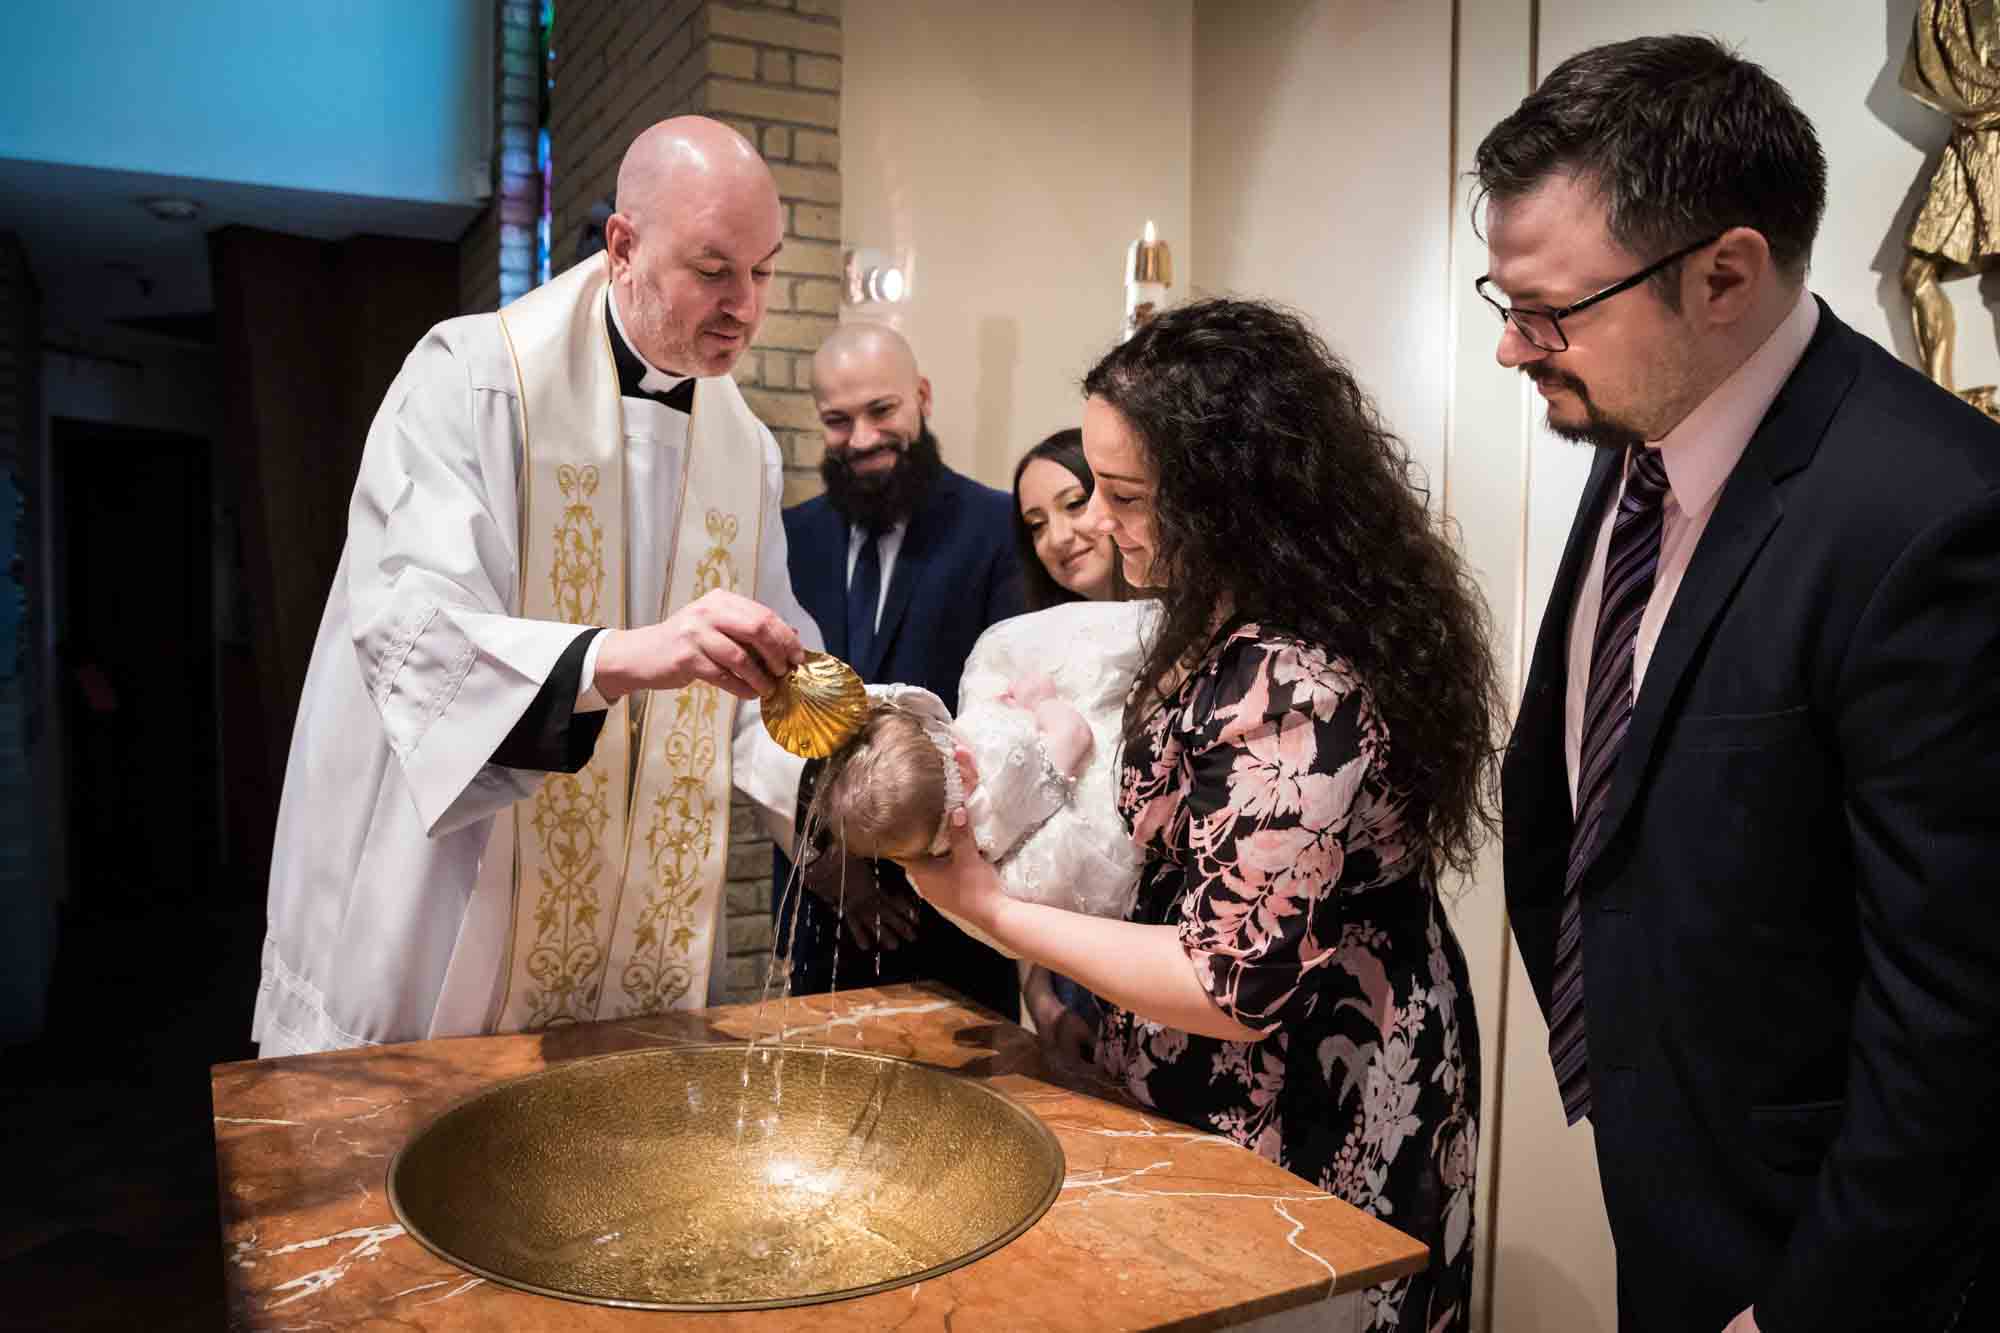 Maspeth baptism photos of priest pouring water on baby's head with family watching